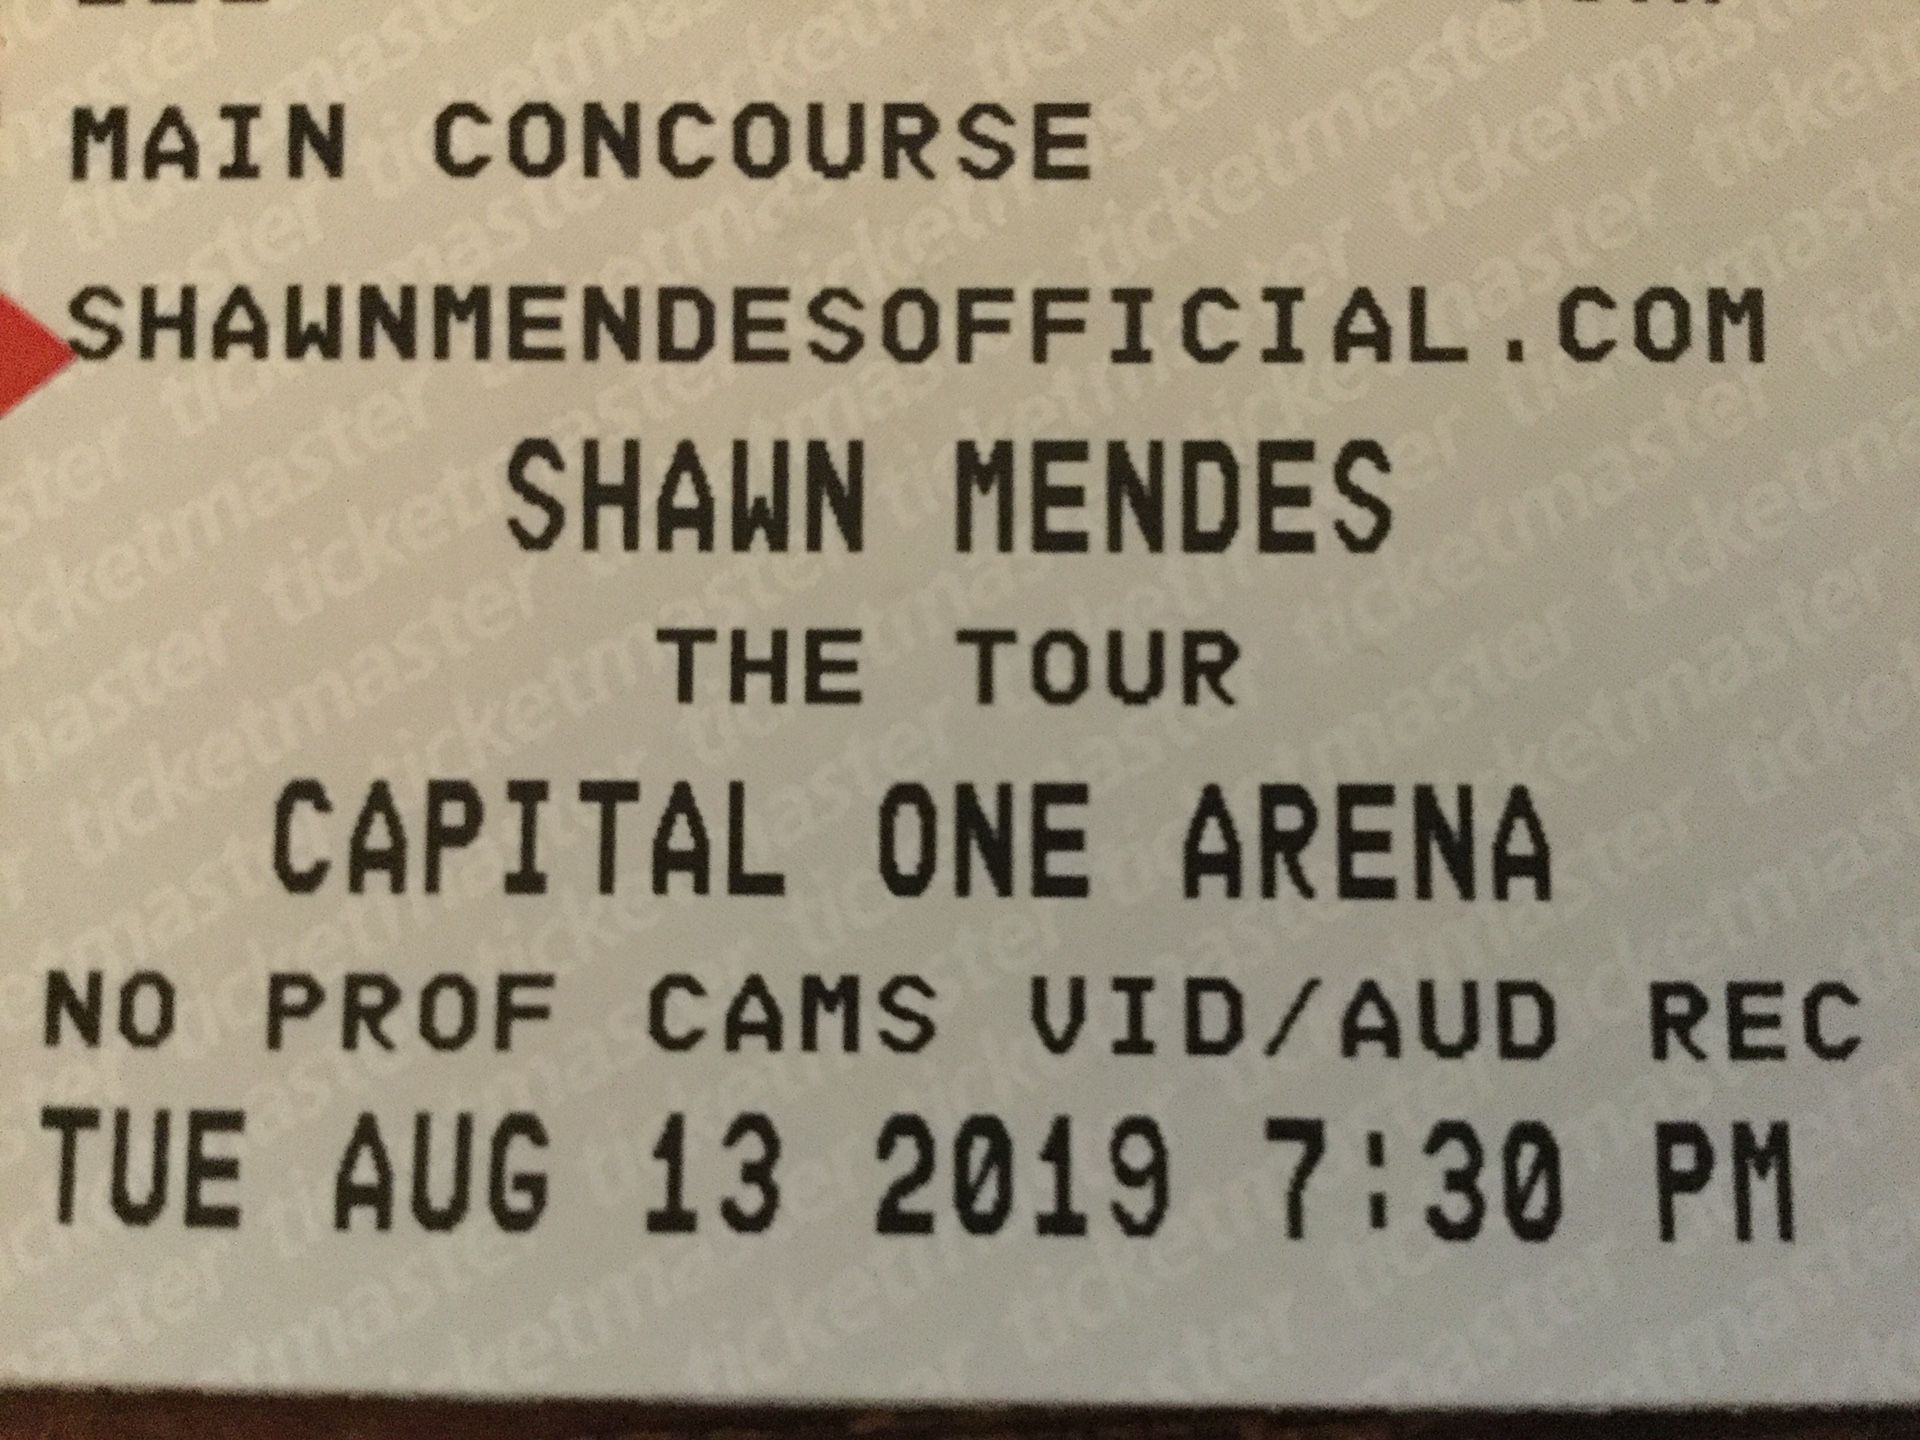 Shawn Mendes Tickets - Capital One Arena - Washington DC